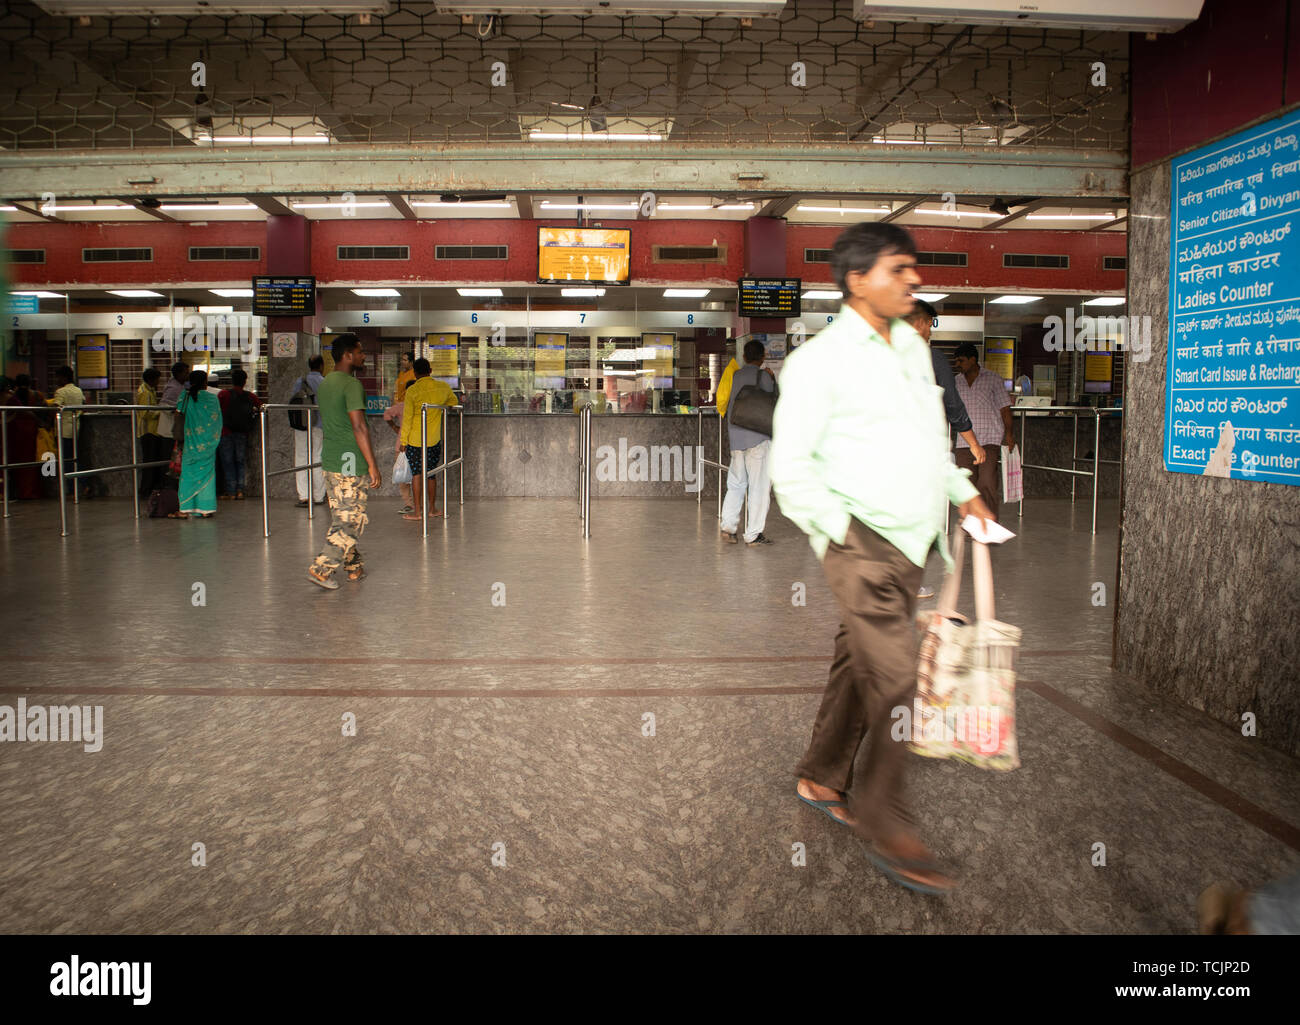 Bangalore India - June 3, 2019: Unidentified people queue to buy tickets at Bangalore railway station. Stock Photo